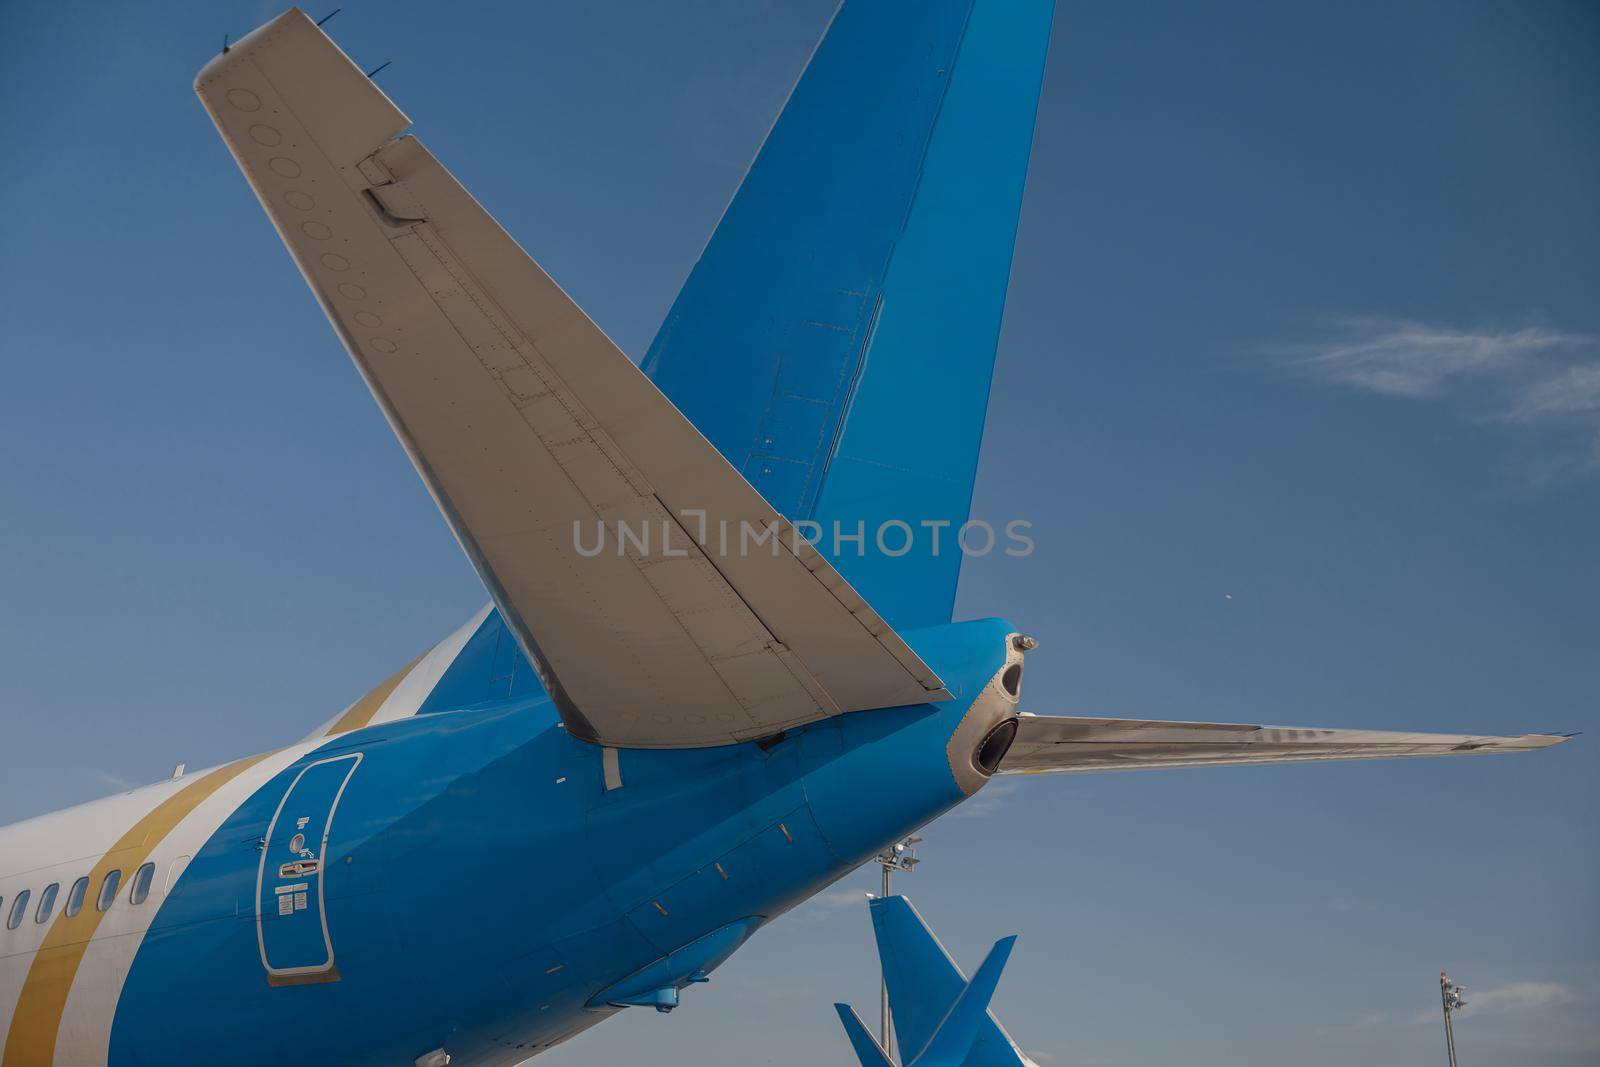 Tail of an aircraft in airport with blue sky in the background. Plane, transportation concept